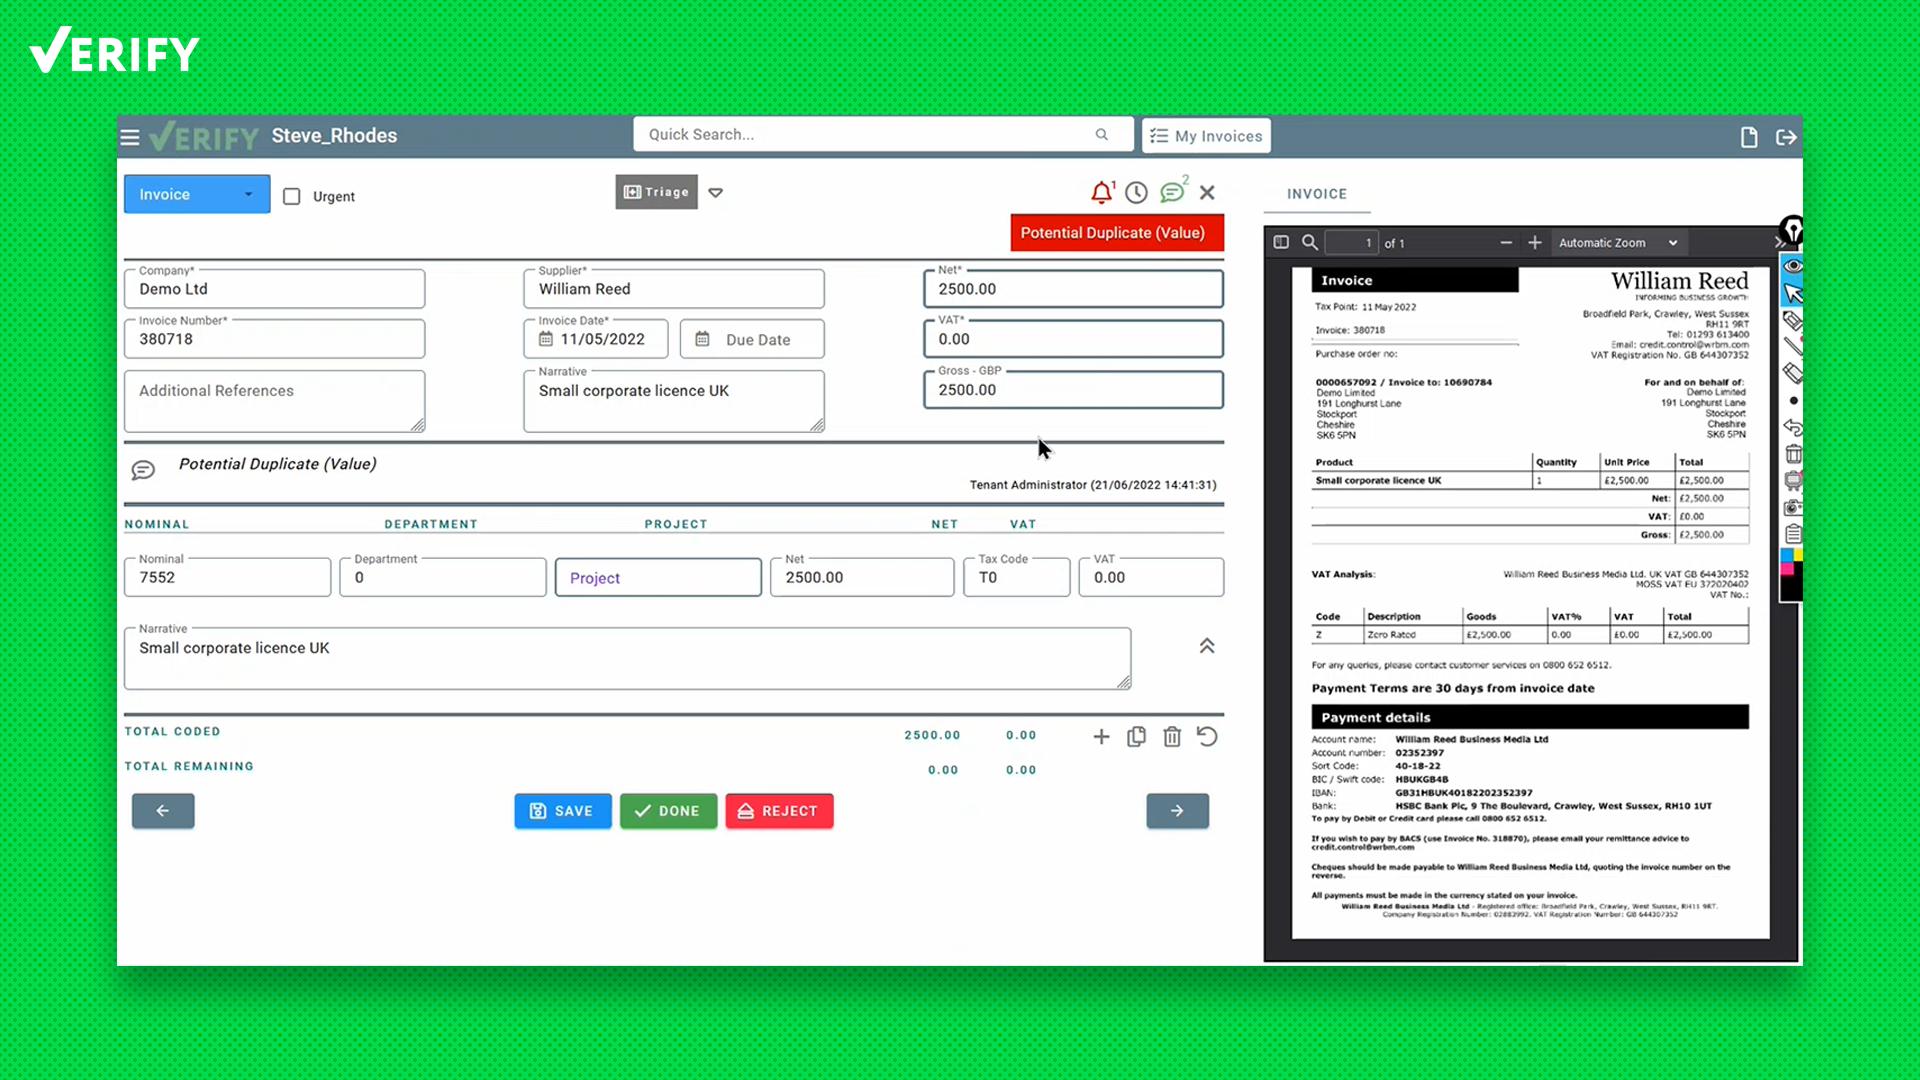 Agilico Verify intelligently captures the header and line item data off of all invoices submitted to the system. It will identify if an invoice is a duplicate, and capture the entity the invoice relates to, the supplier, PO number and net, VAT & gross.